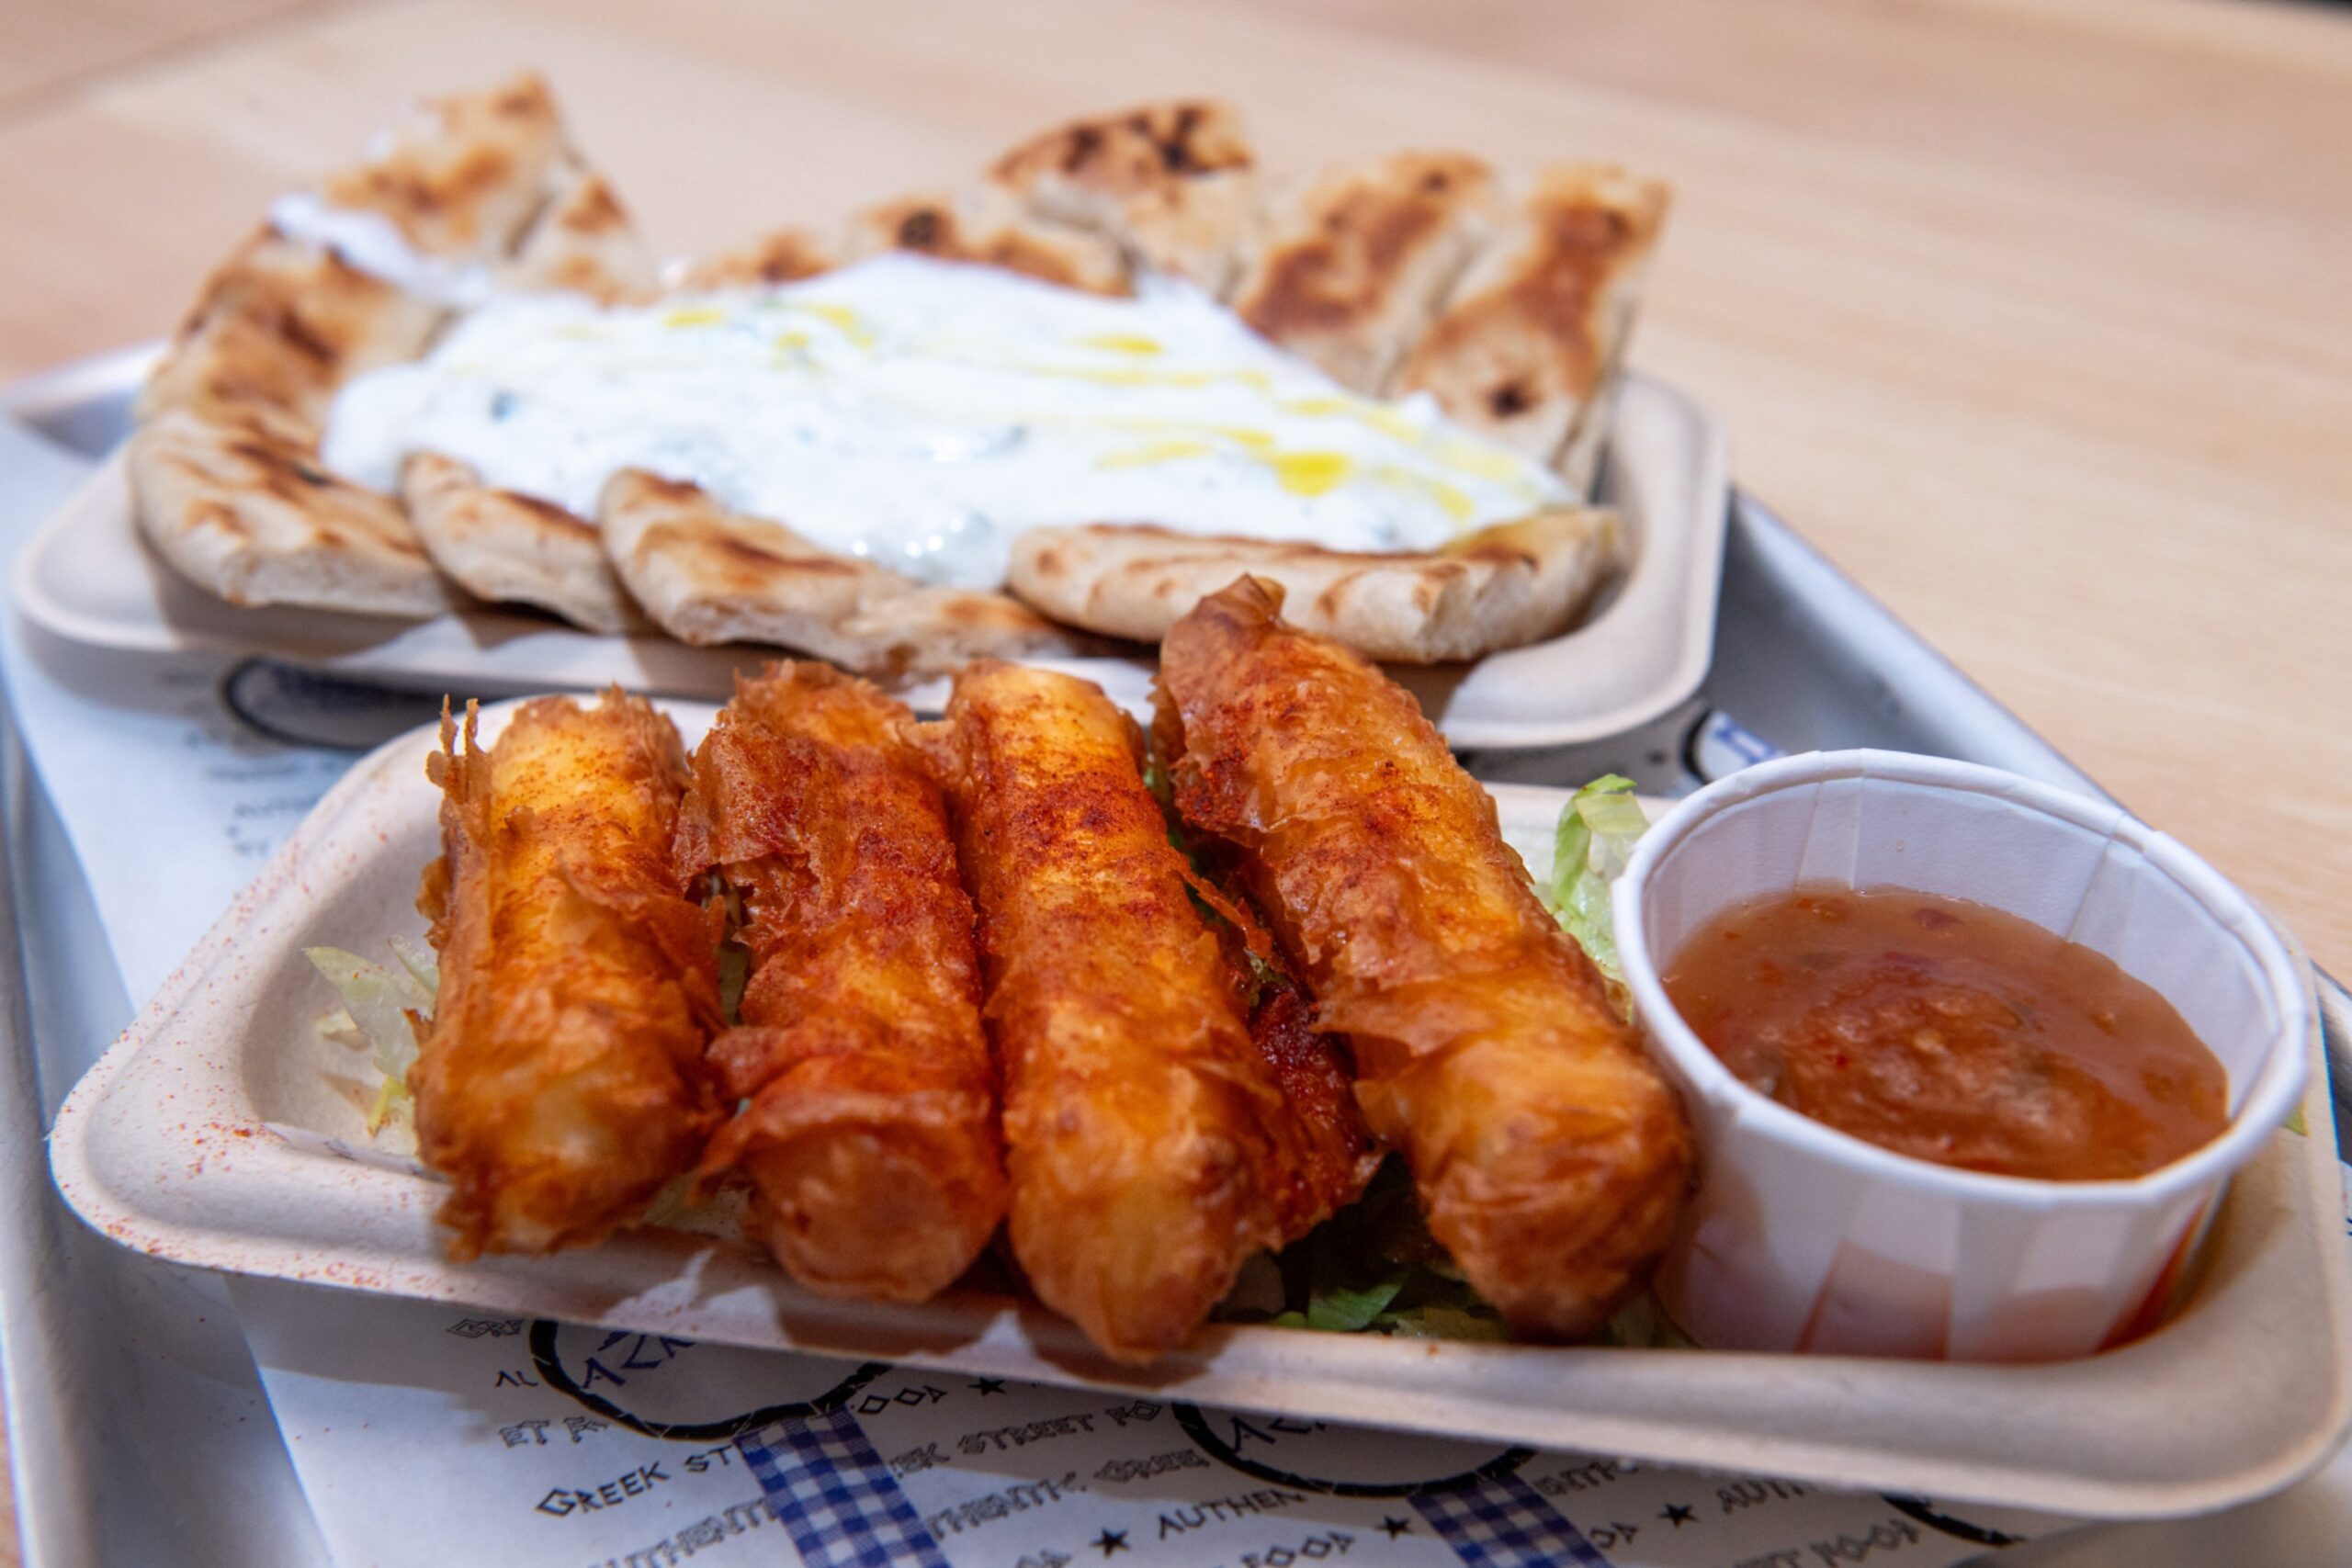 Halloumi rolls from Acropolis in aberdeen